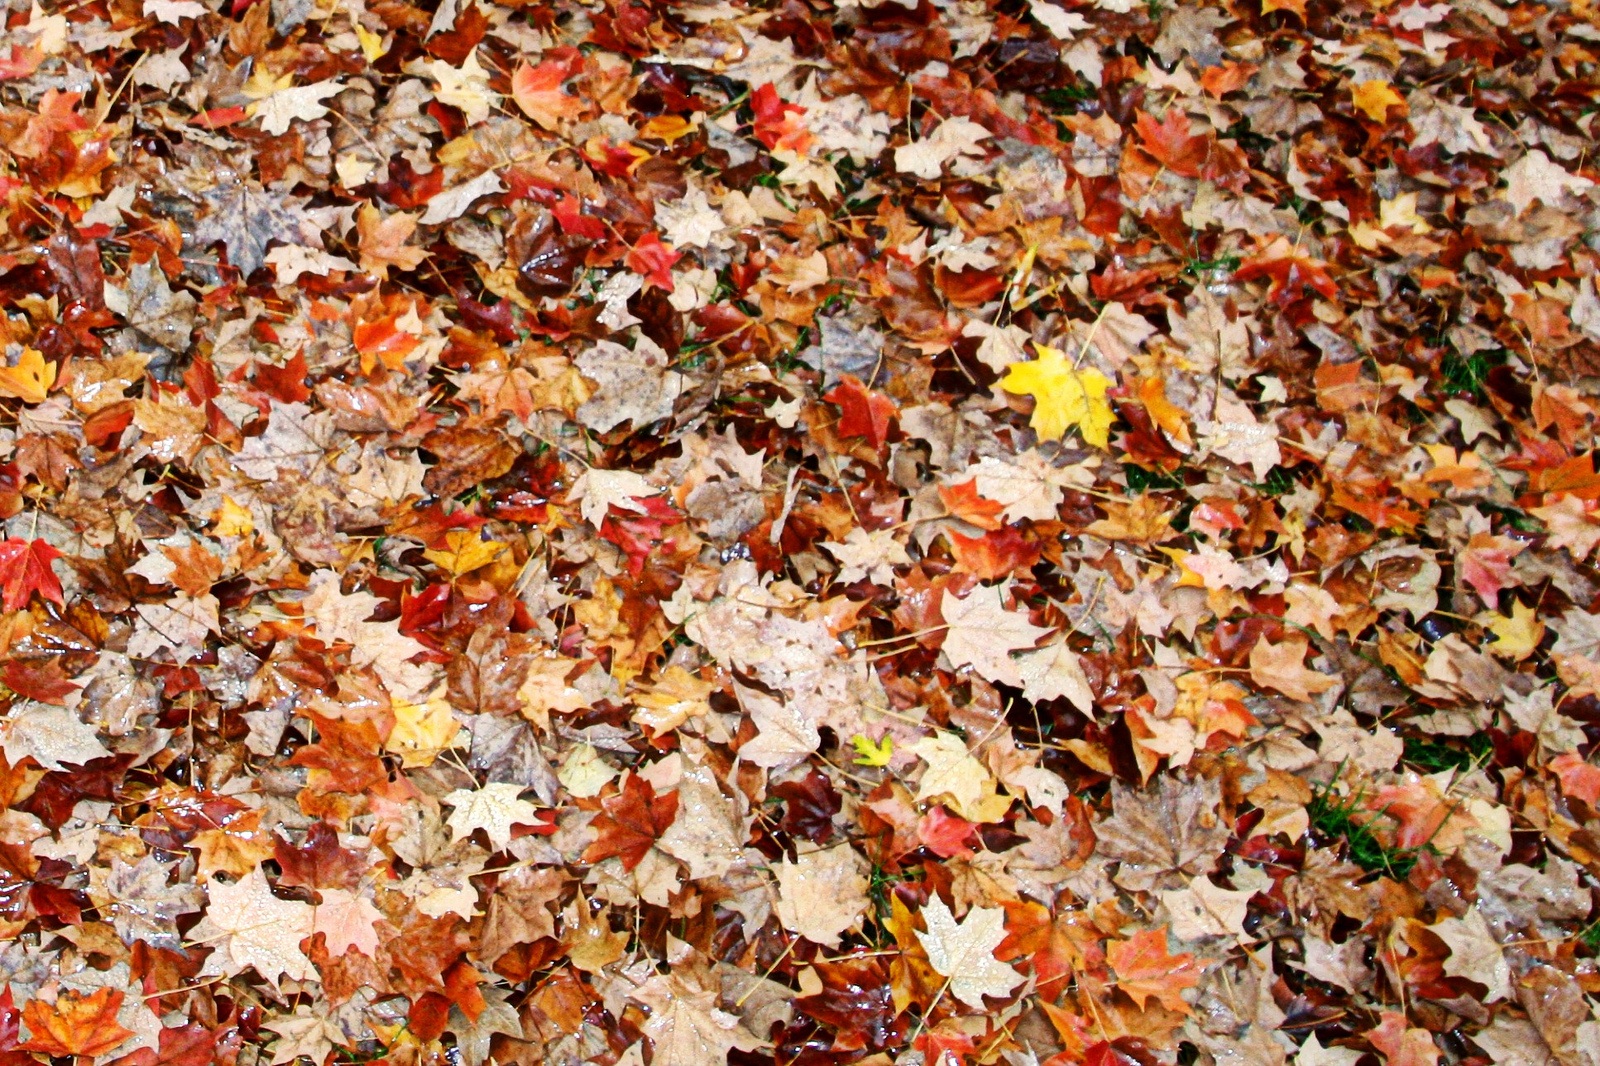 Next Time You Rake Leaves, Consider the Damage to the Ecosystem